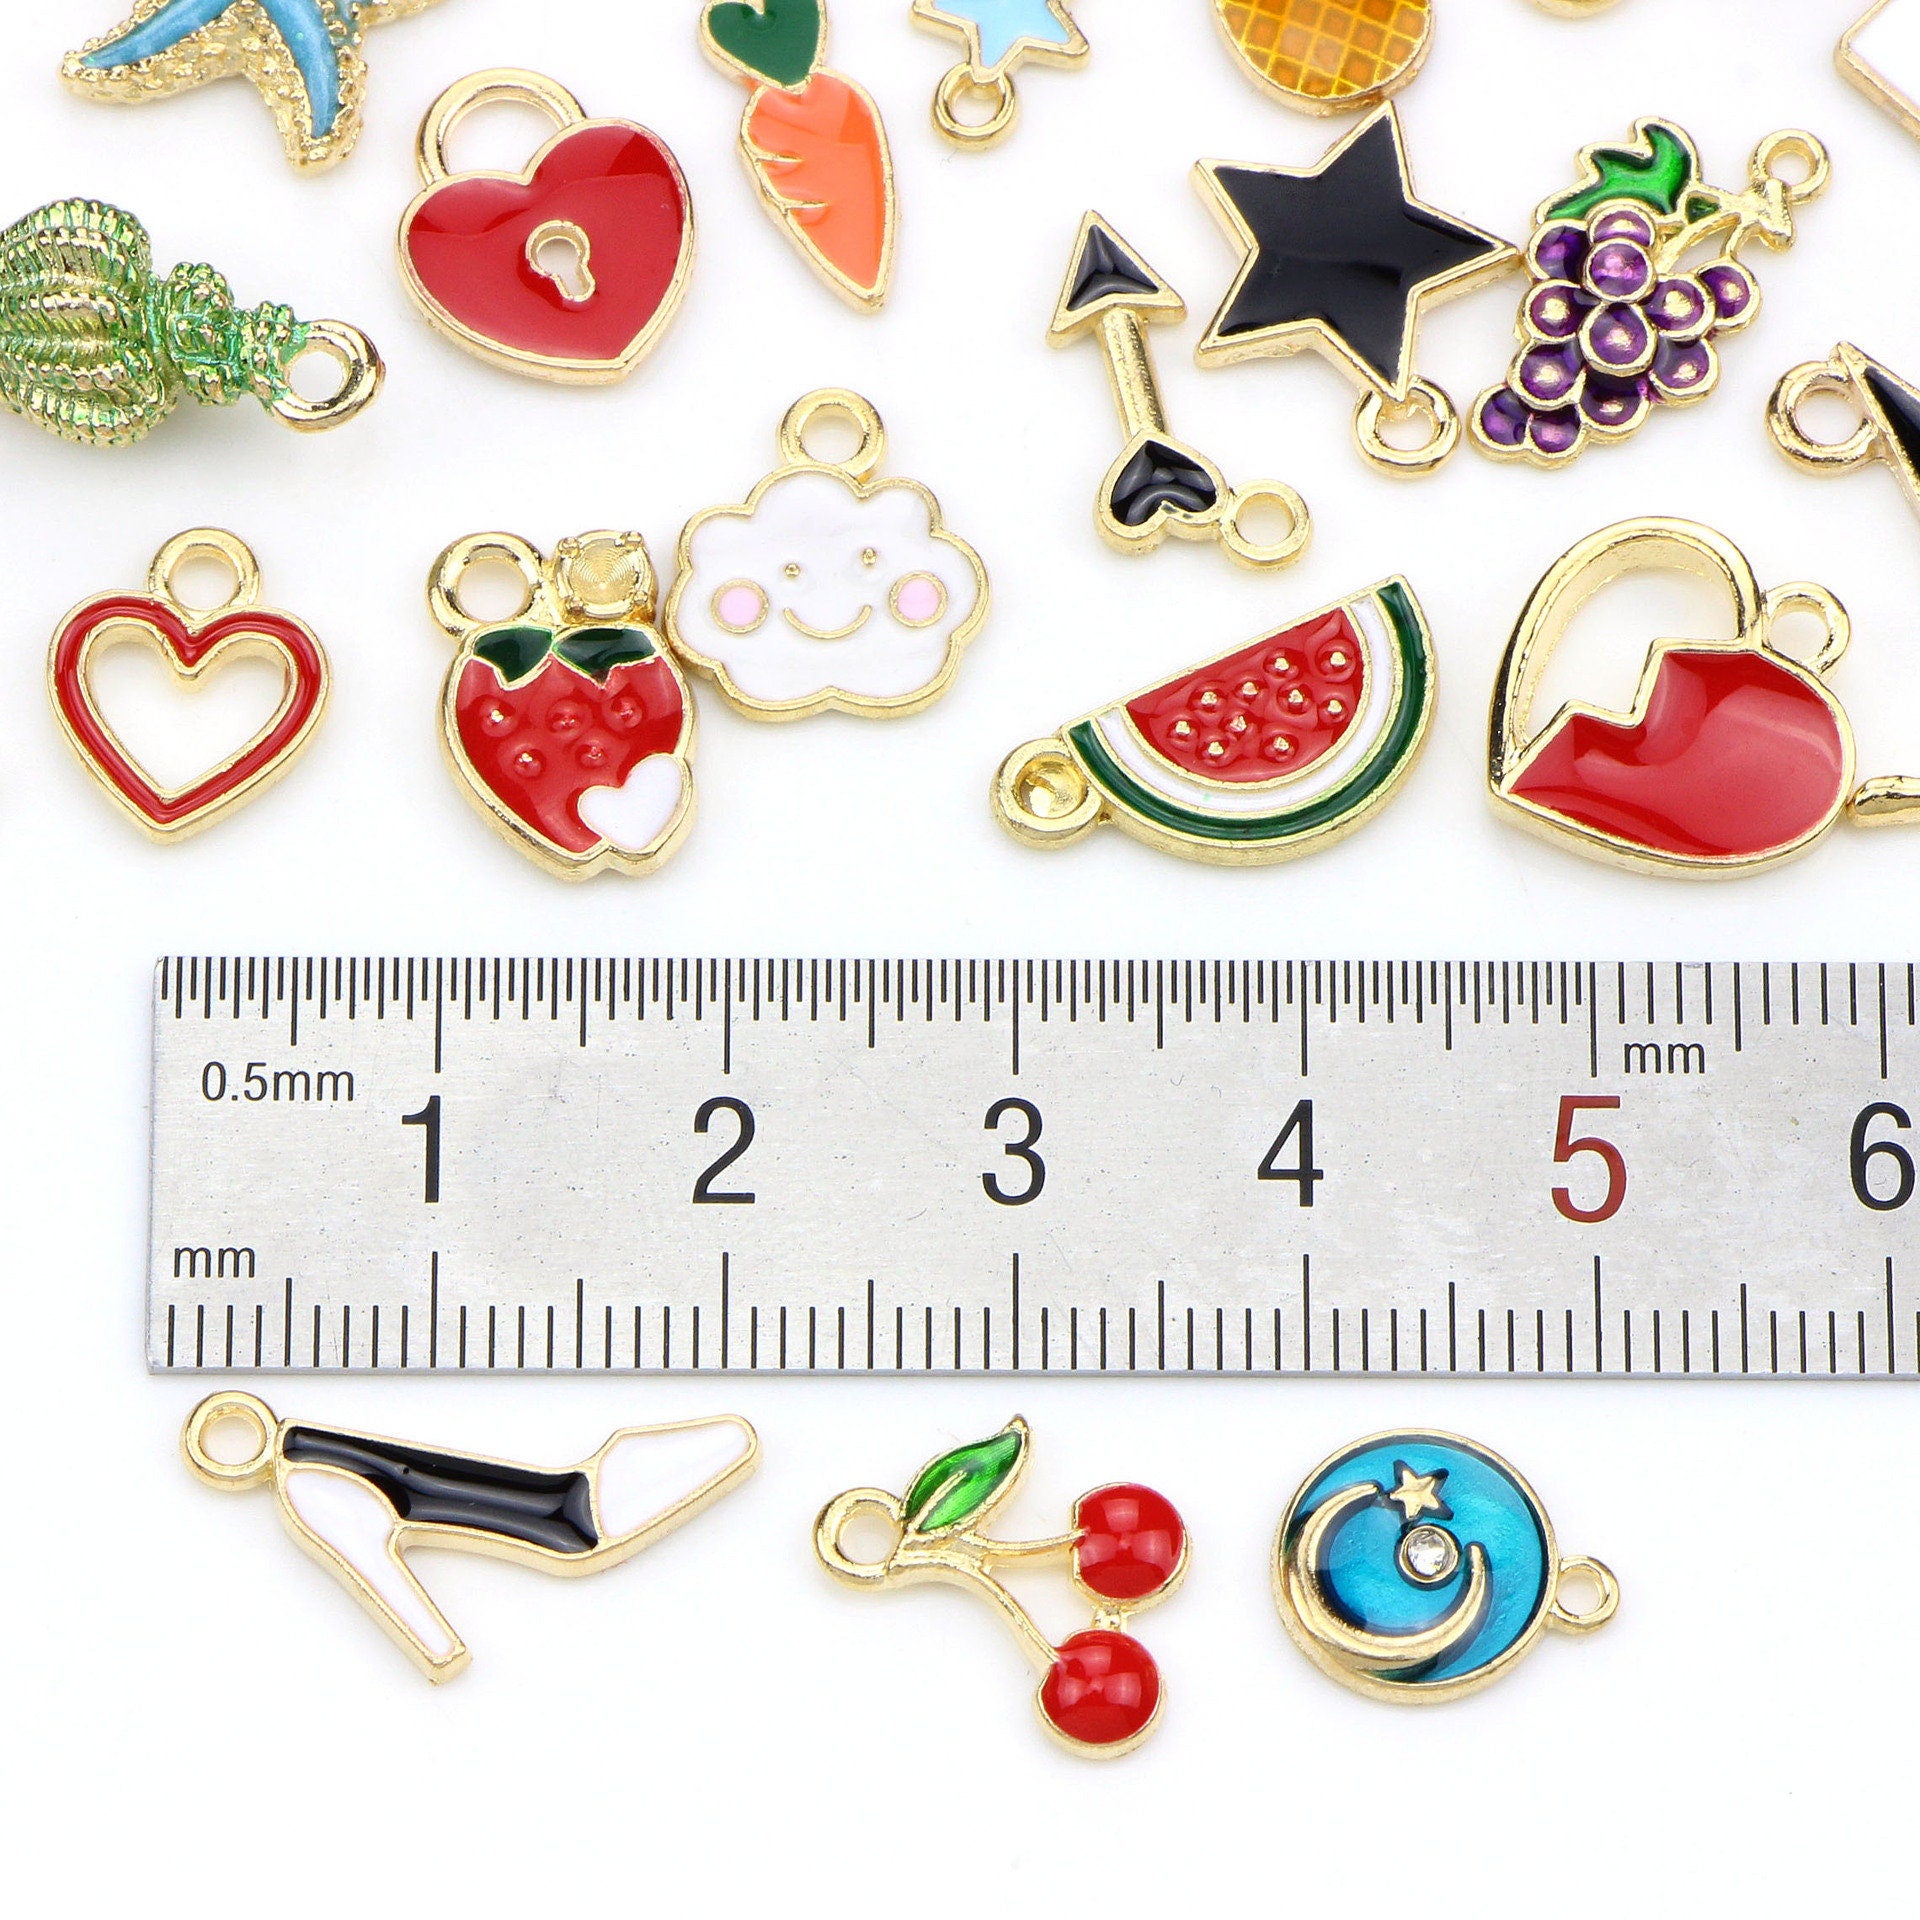 30 fun assorted enamel charms, Nickel free metal pendants, Cute mixed shapes for jewelry making